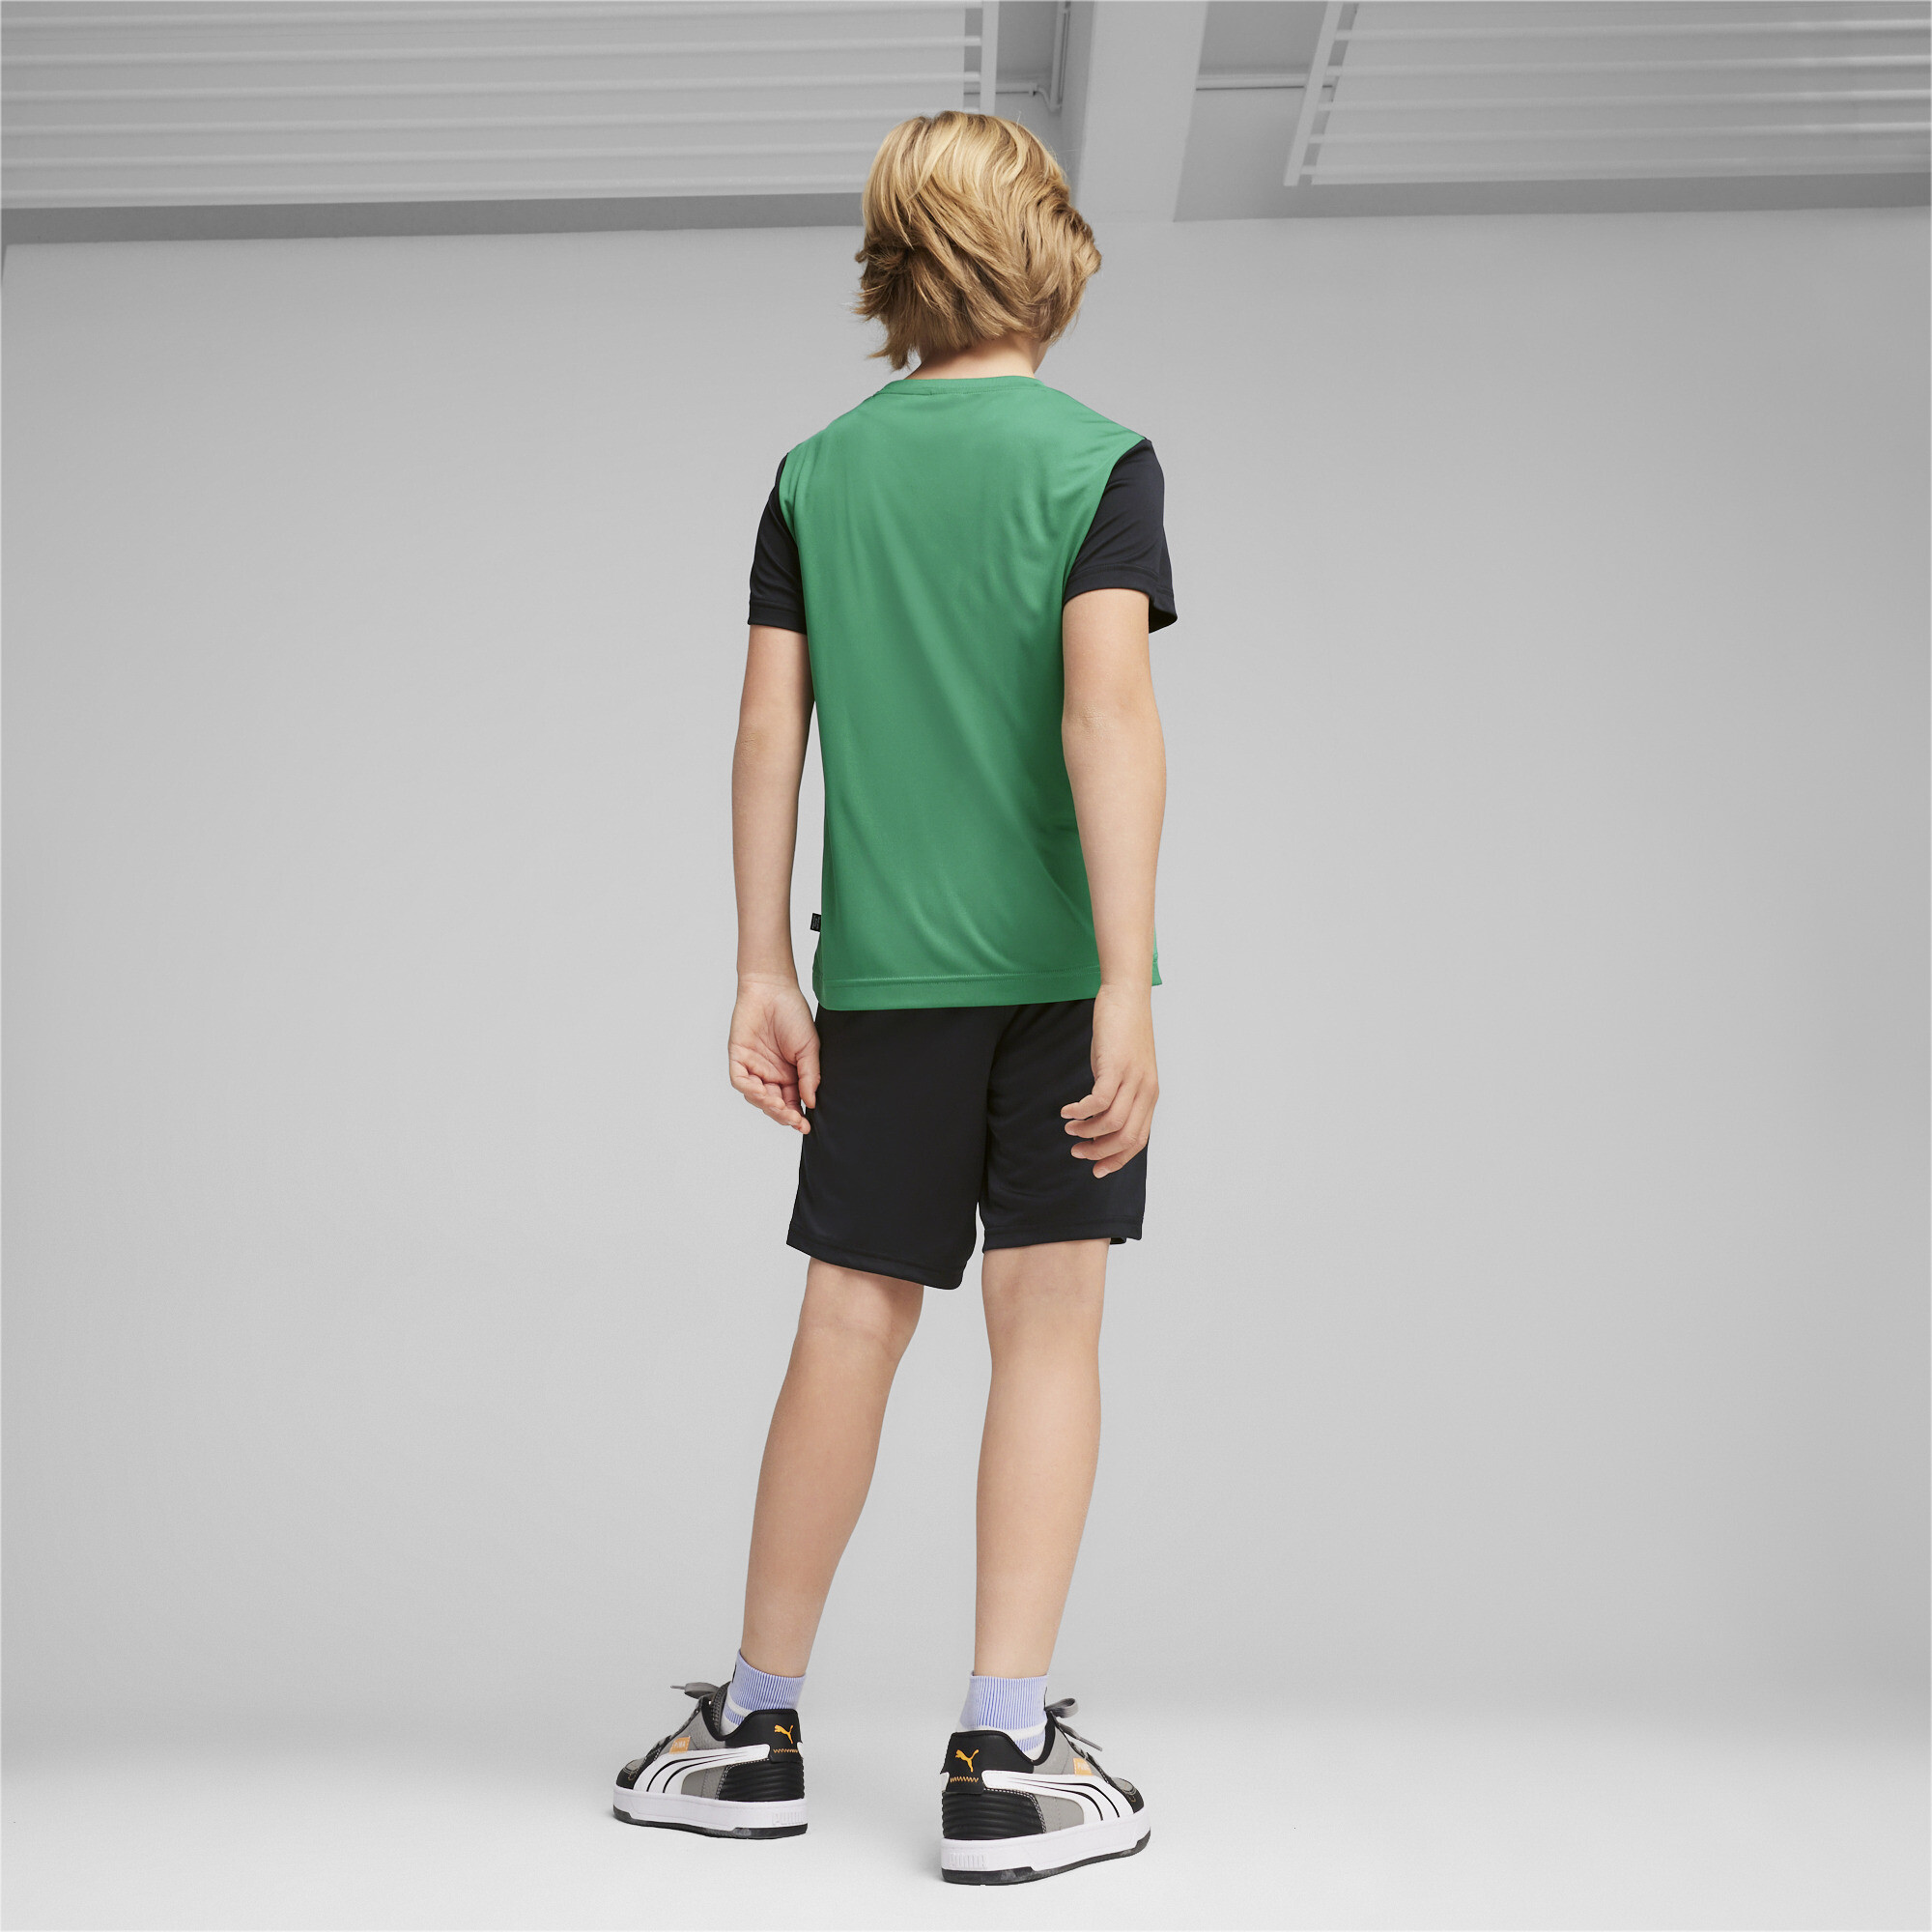 Men's Puma Polyester Youth Shorts Set, Green, Size 7-8Y, Clothing